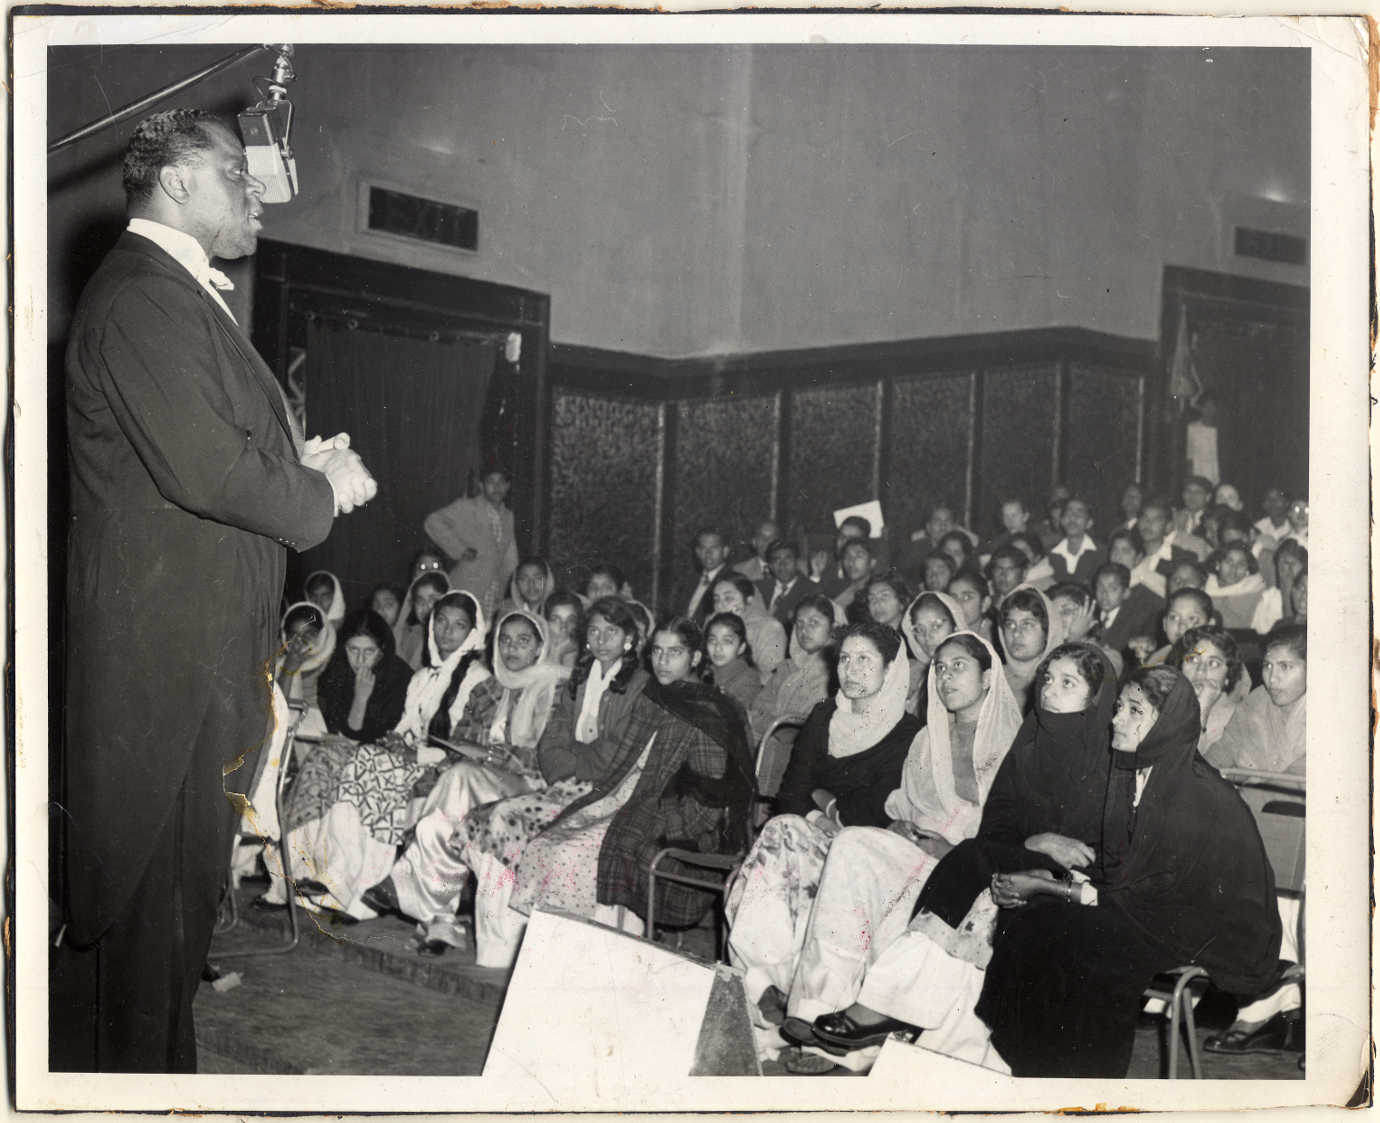 Photograph of concert singer William Warfield performing in Lahore, Pakistan, 1958. Image courtesy of the Amistad Research Center.